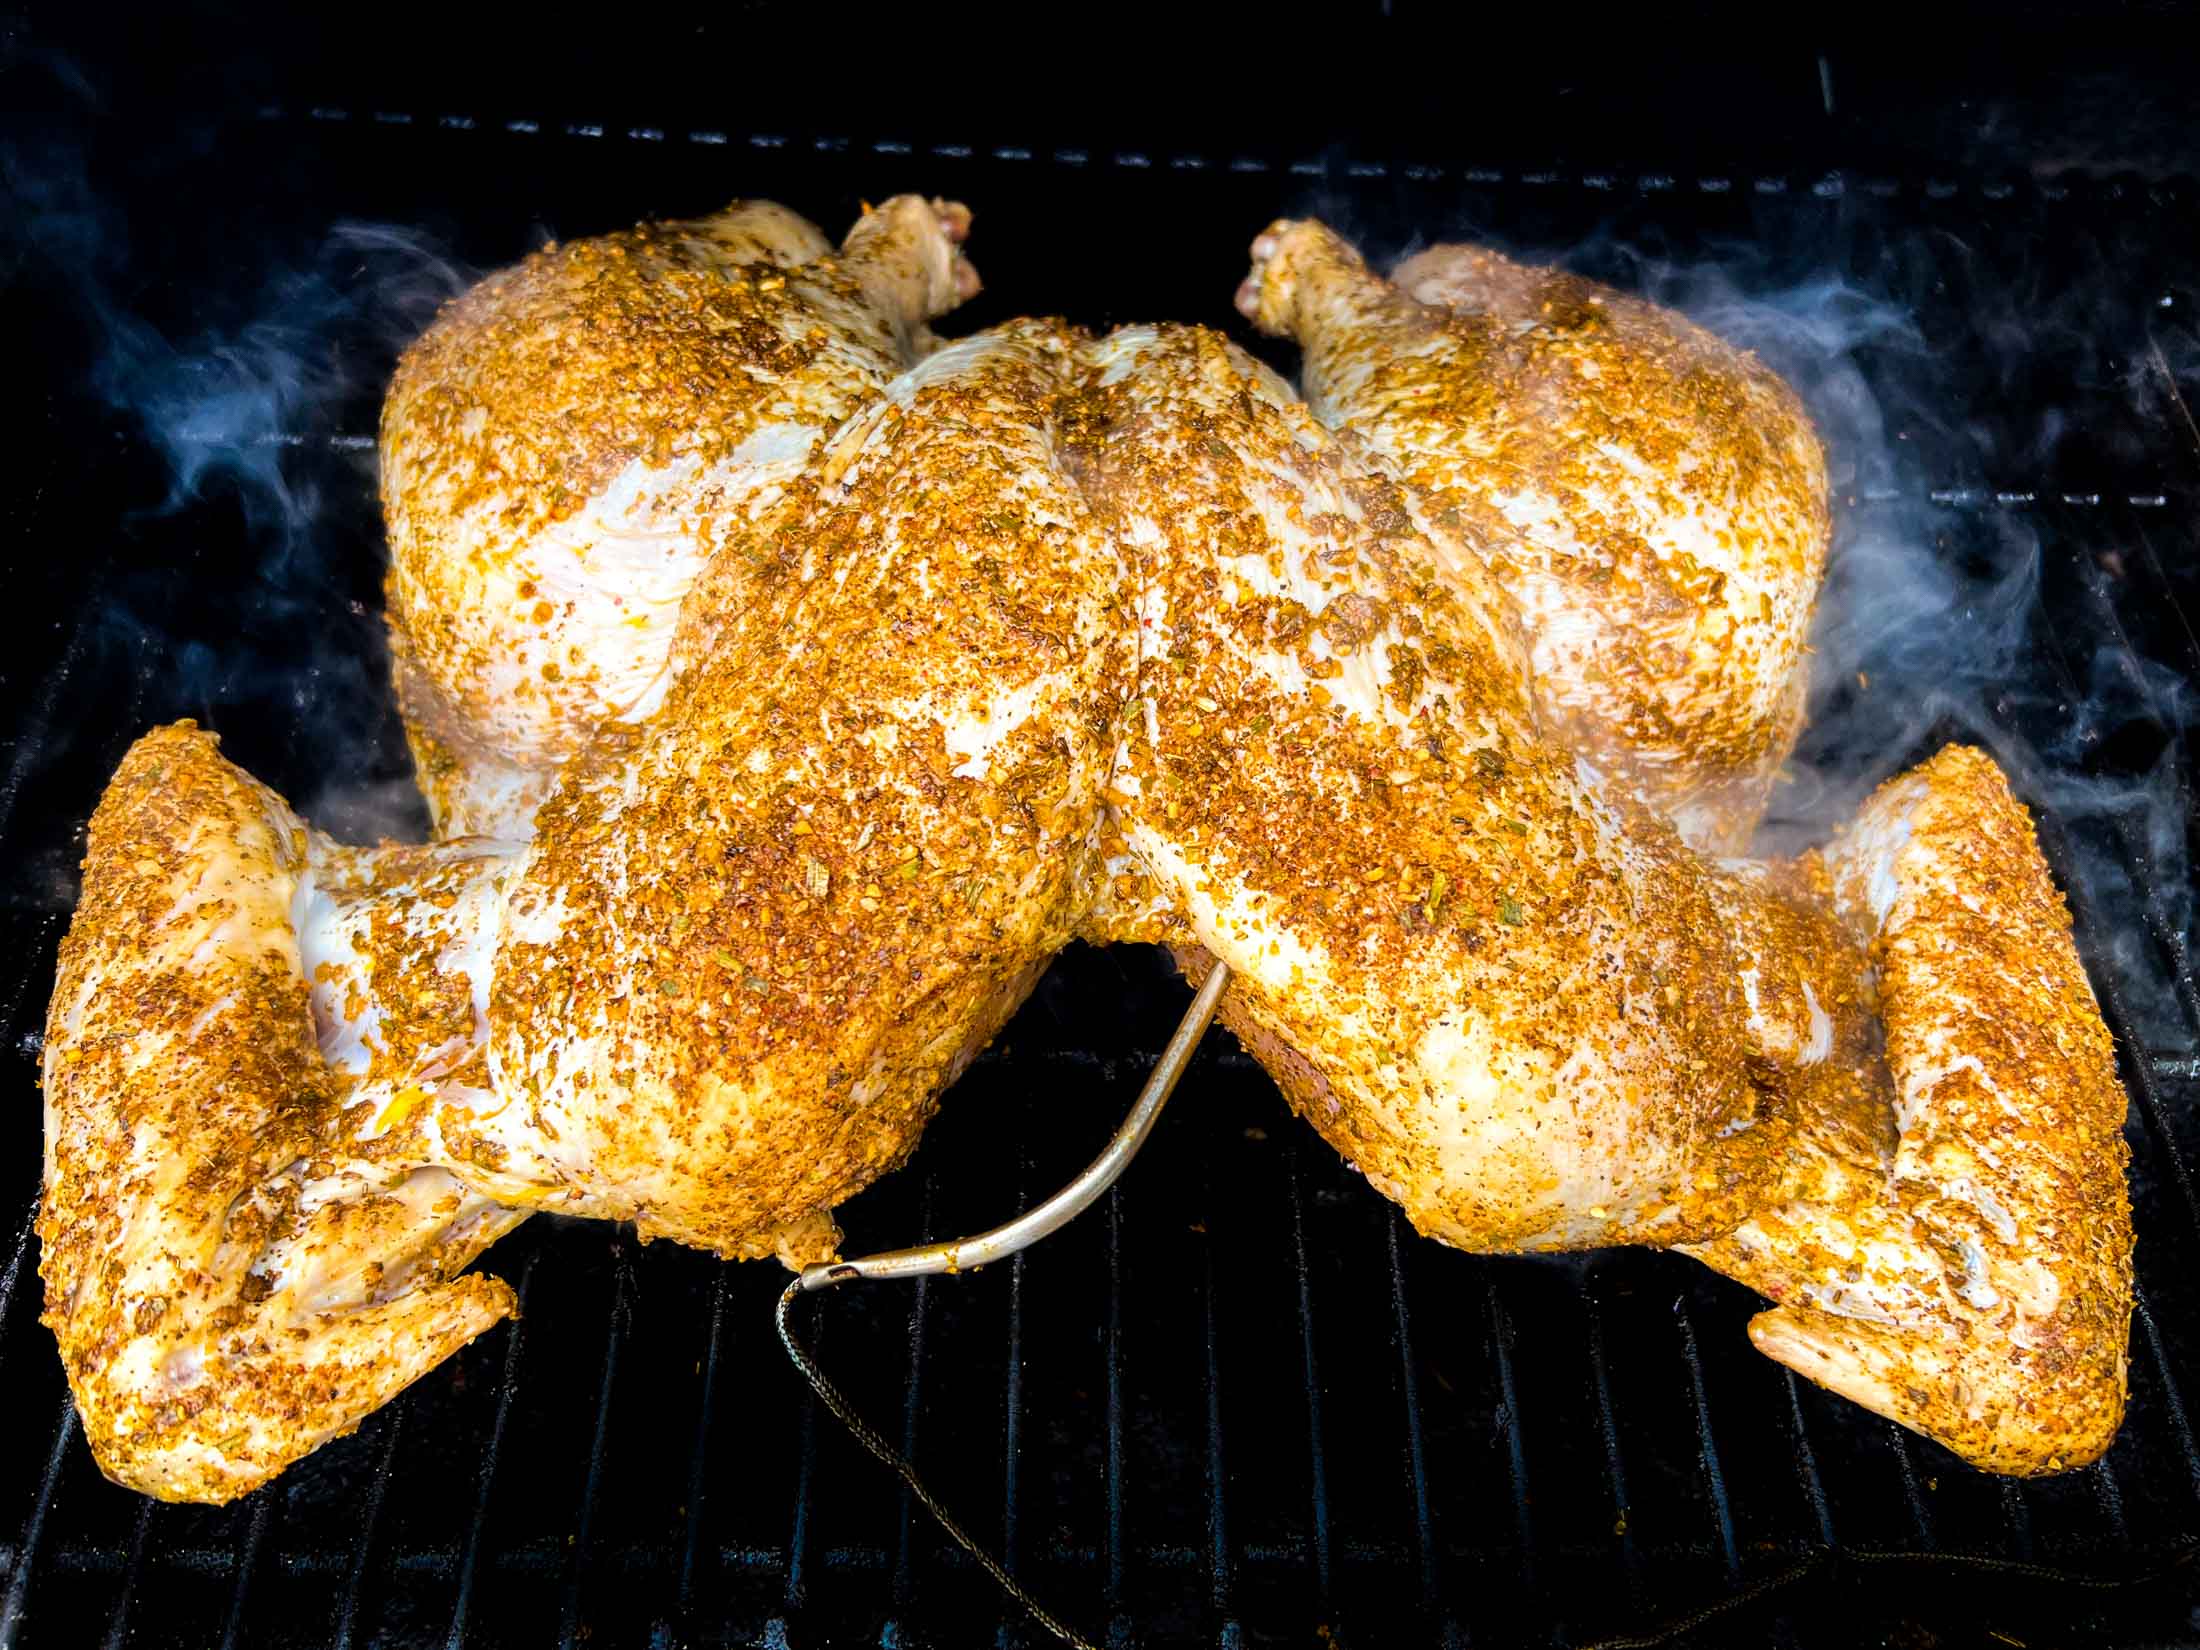 Spatchcock turkey on a pellet grill with smoke swirling around it.